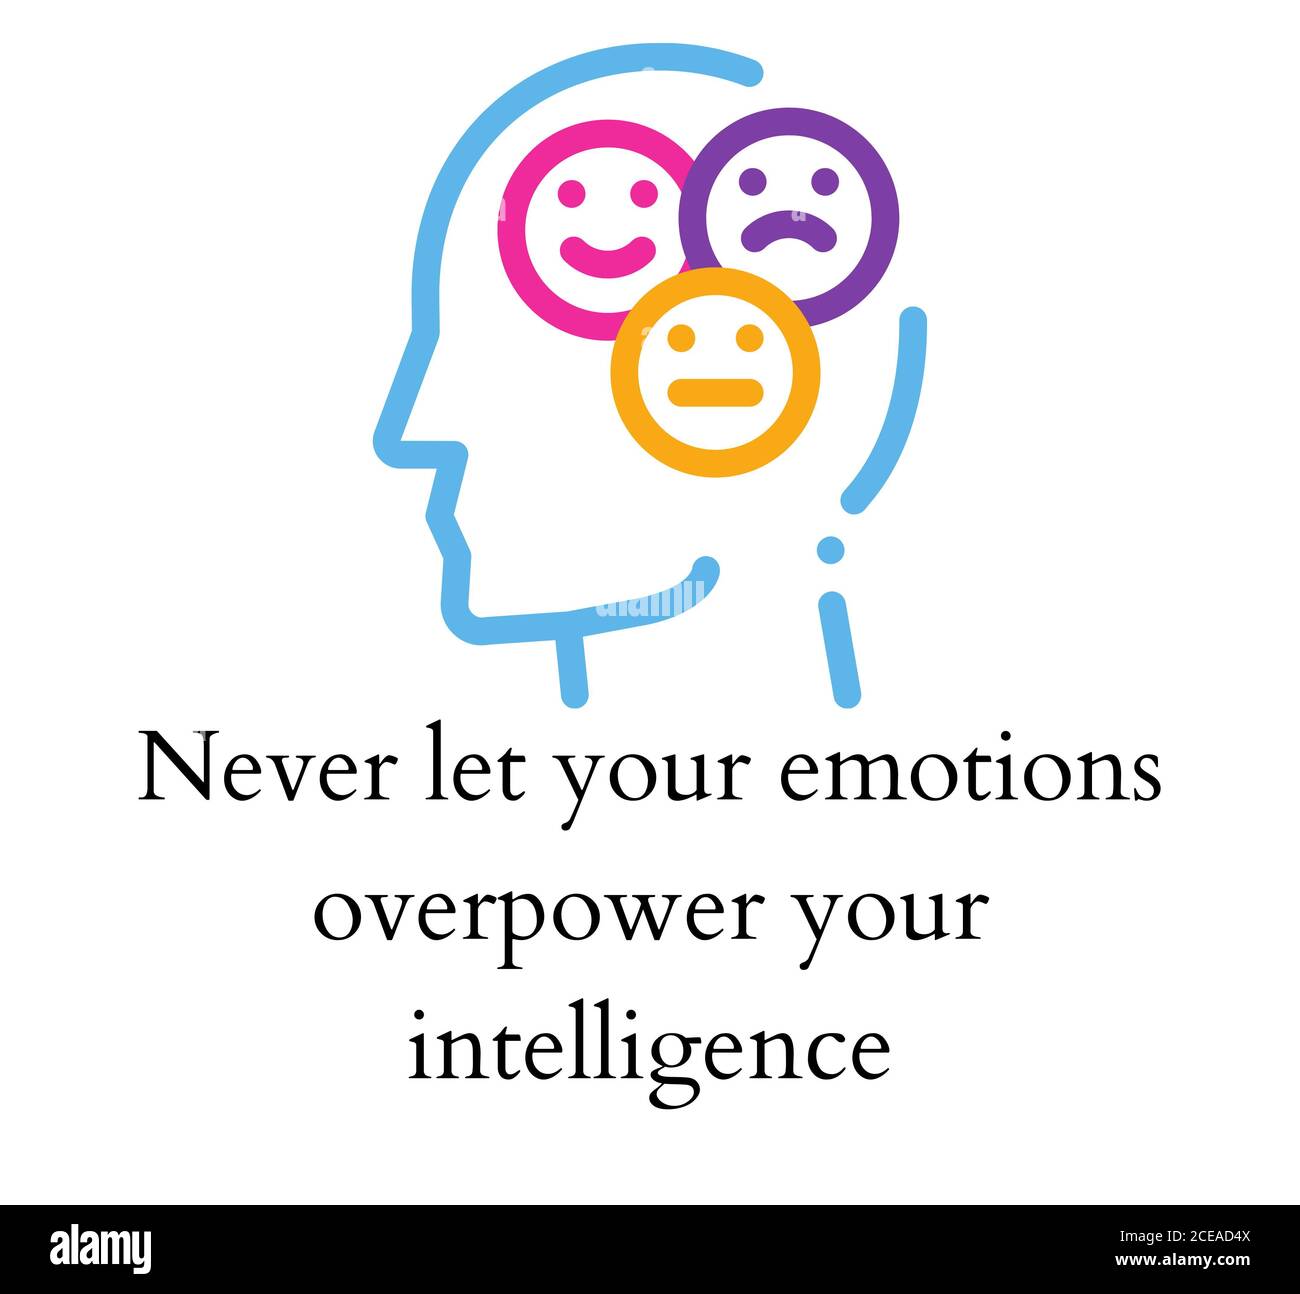 Never let your emotions overpower your intelligence Stock Photo